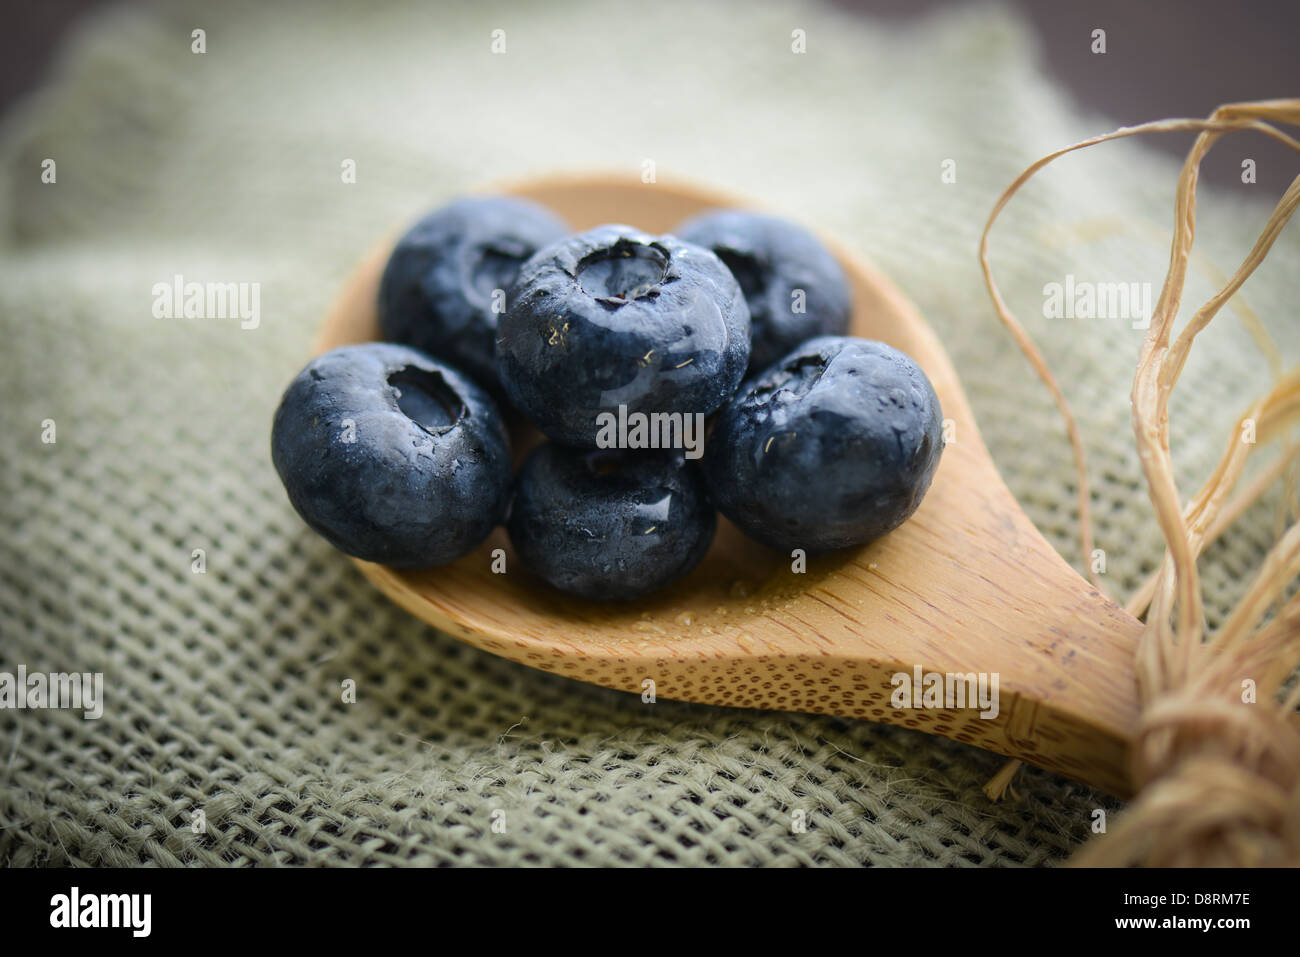 Blueberries on a Spoon Close Up Stock Photo